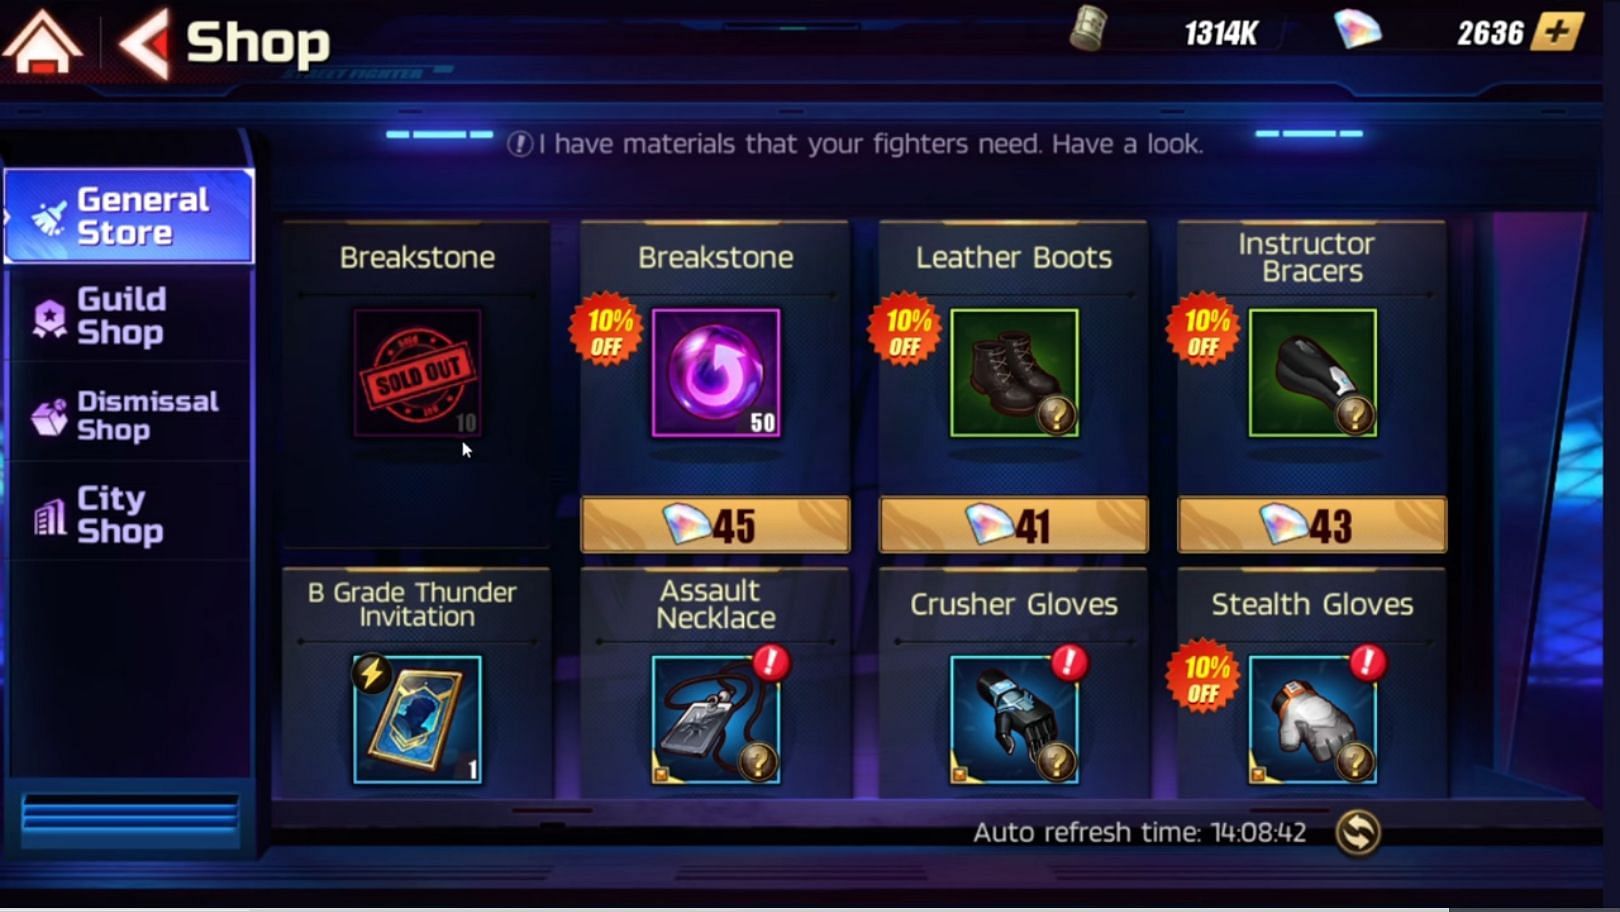 Users can buy in-game items from the Shop section. (image via YouTube/Rokage)